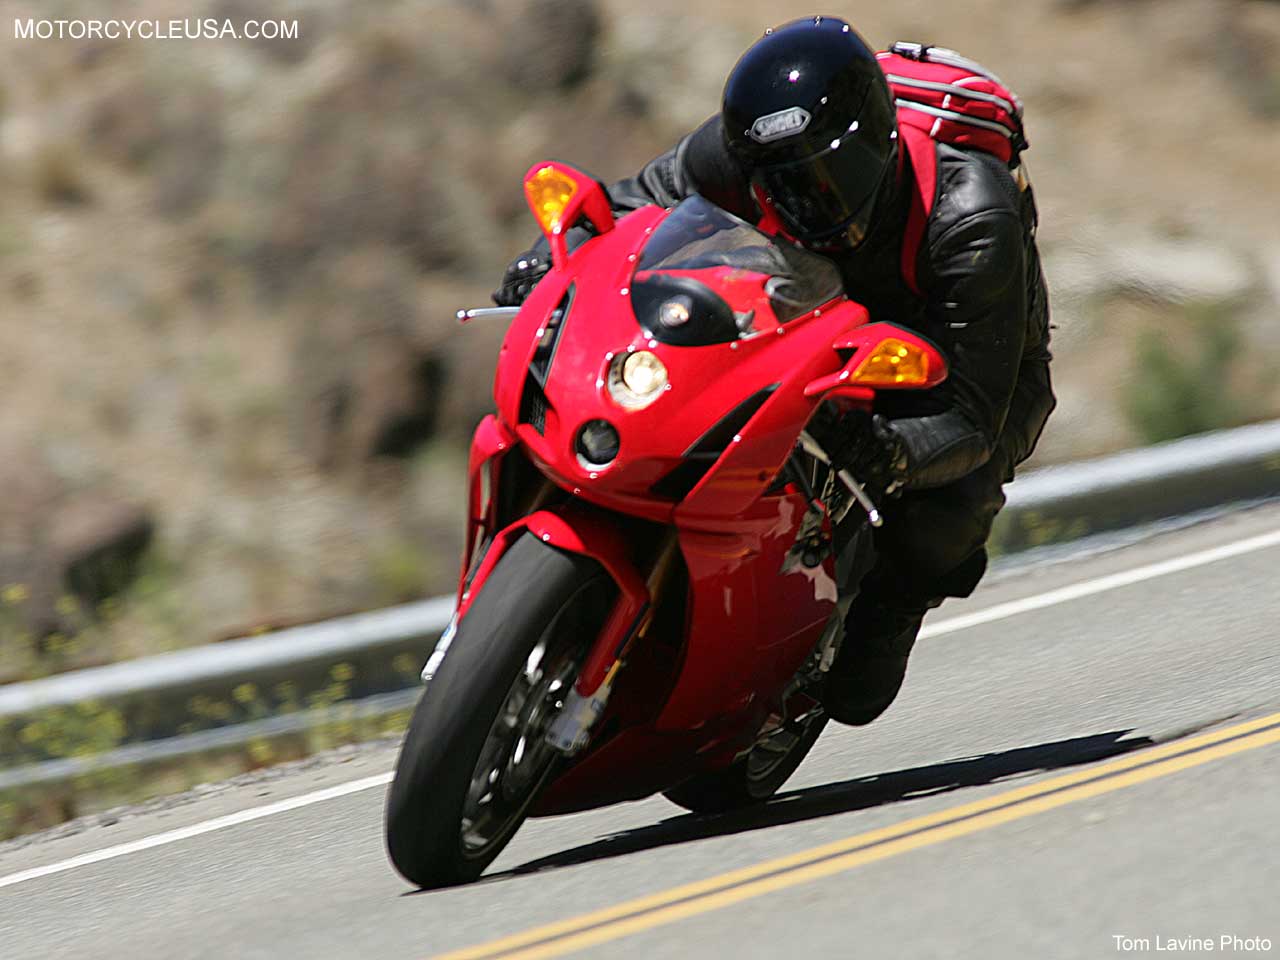 Ducati 999s and video reviews